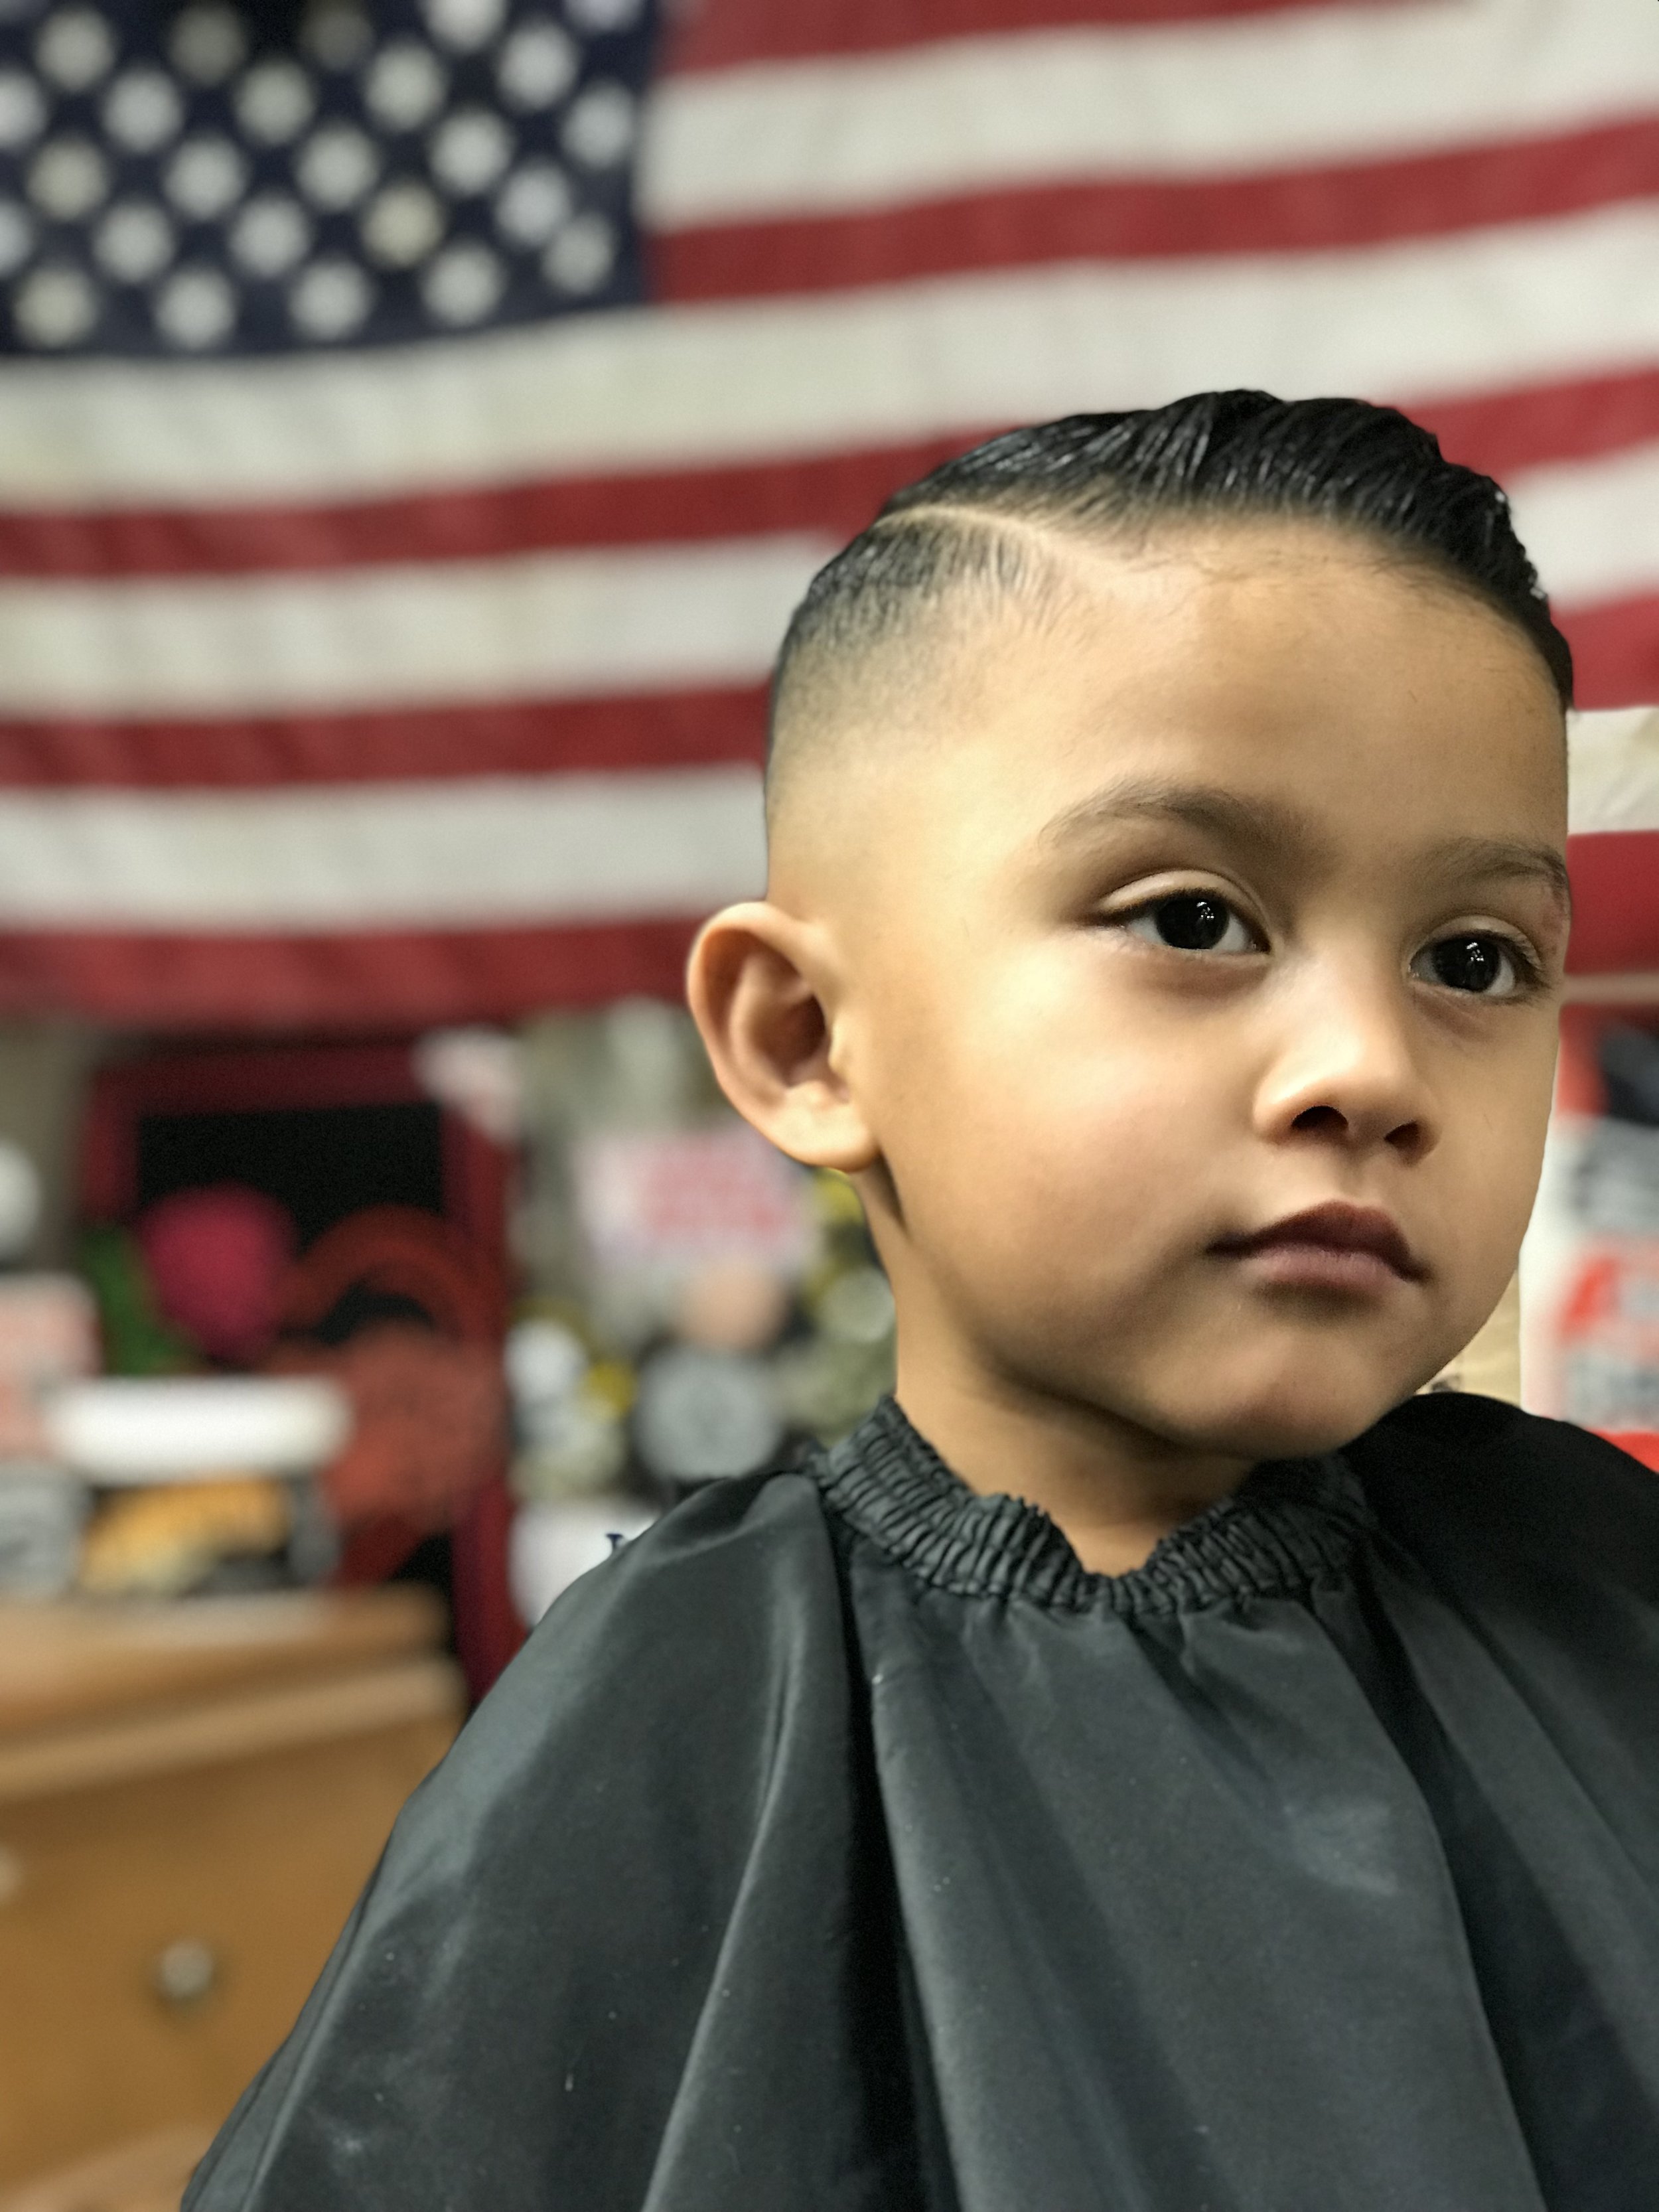 GALLERY — STAY GOLD BARBER SHOP